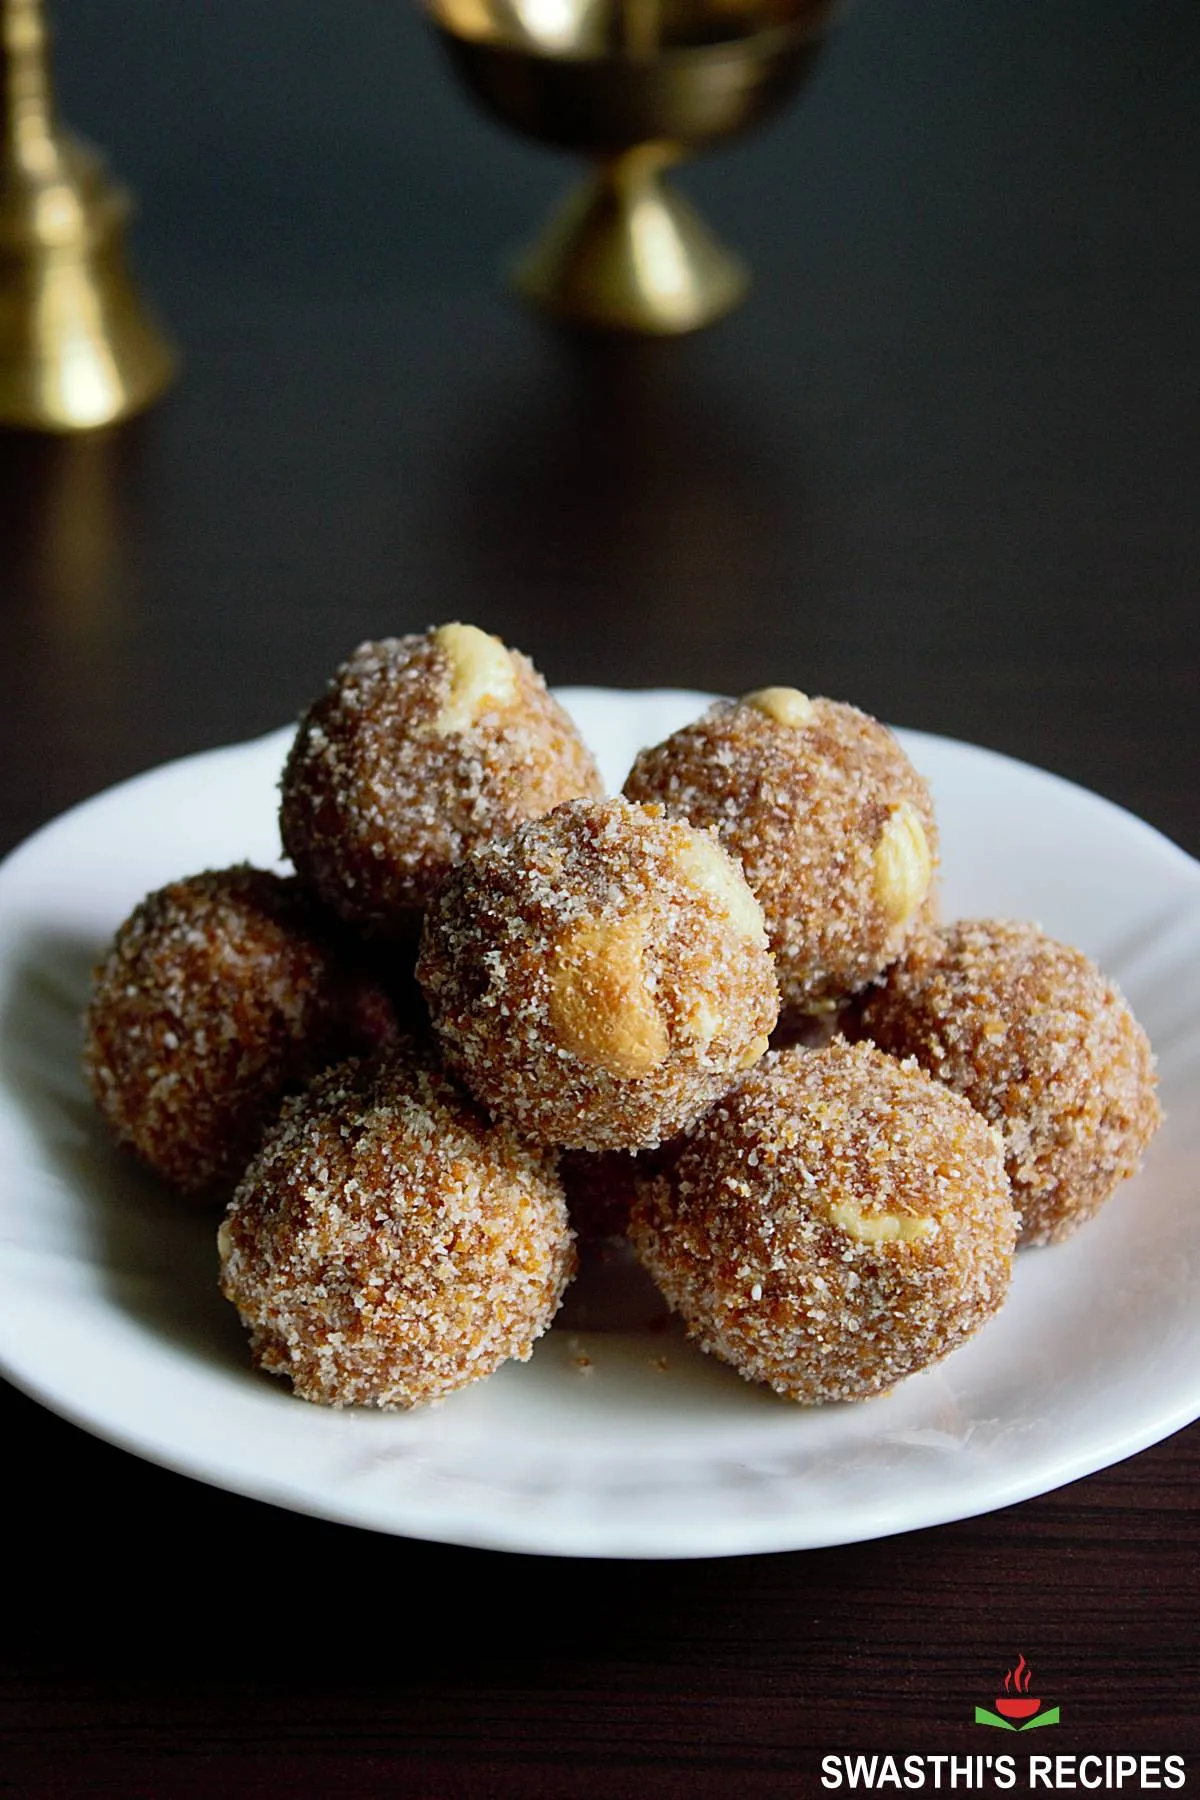 Aval laddu also known as poha ladoo